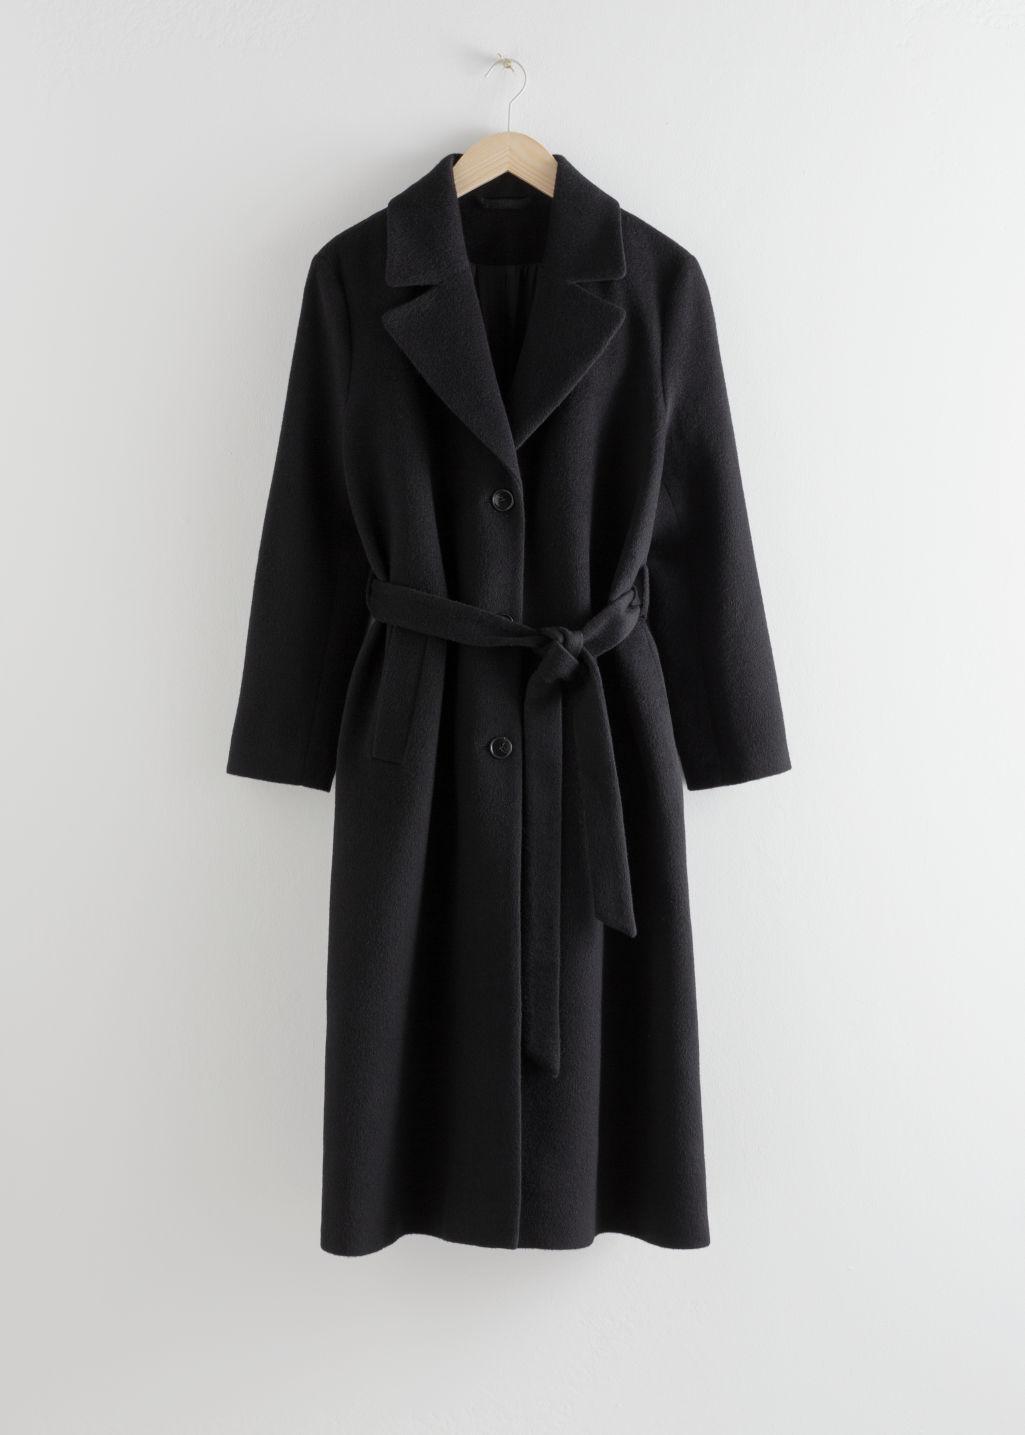 & Other Stories Wool Oversized Alpaca Blend Coat in Black - Save 11% - Lyst